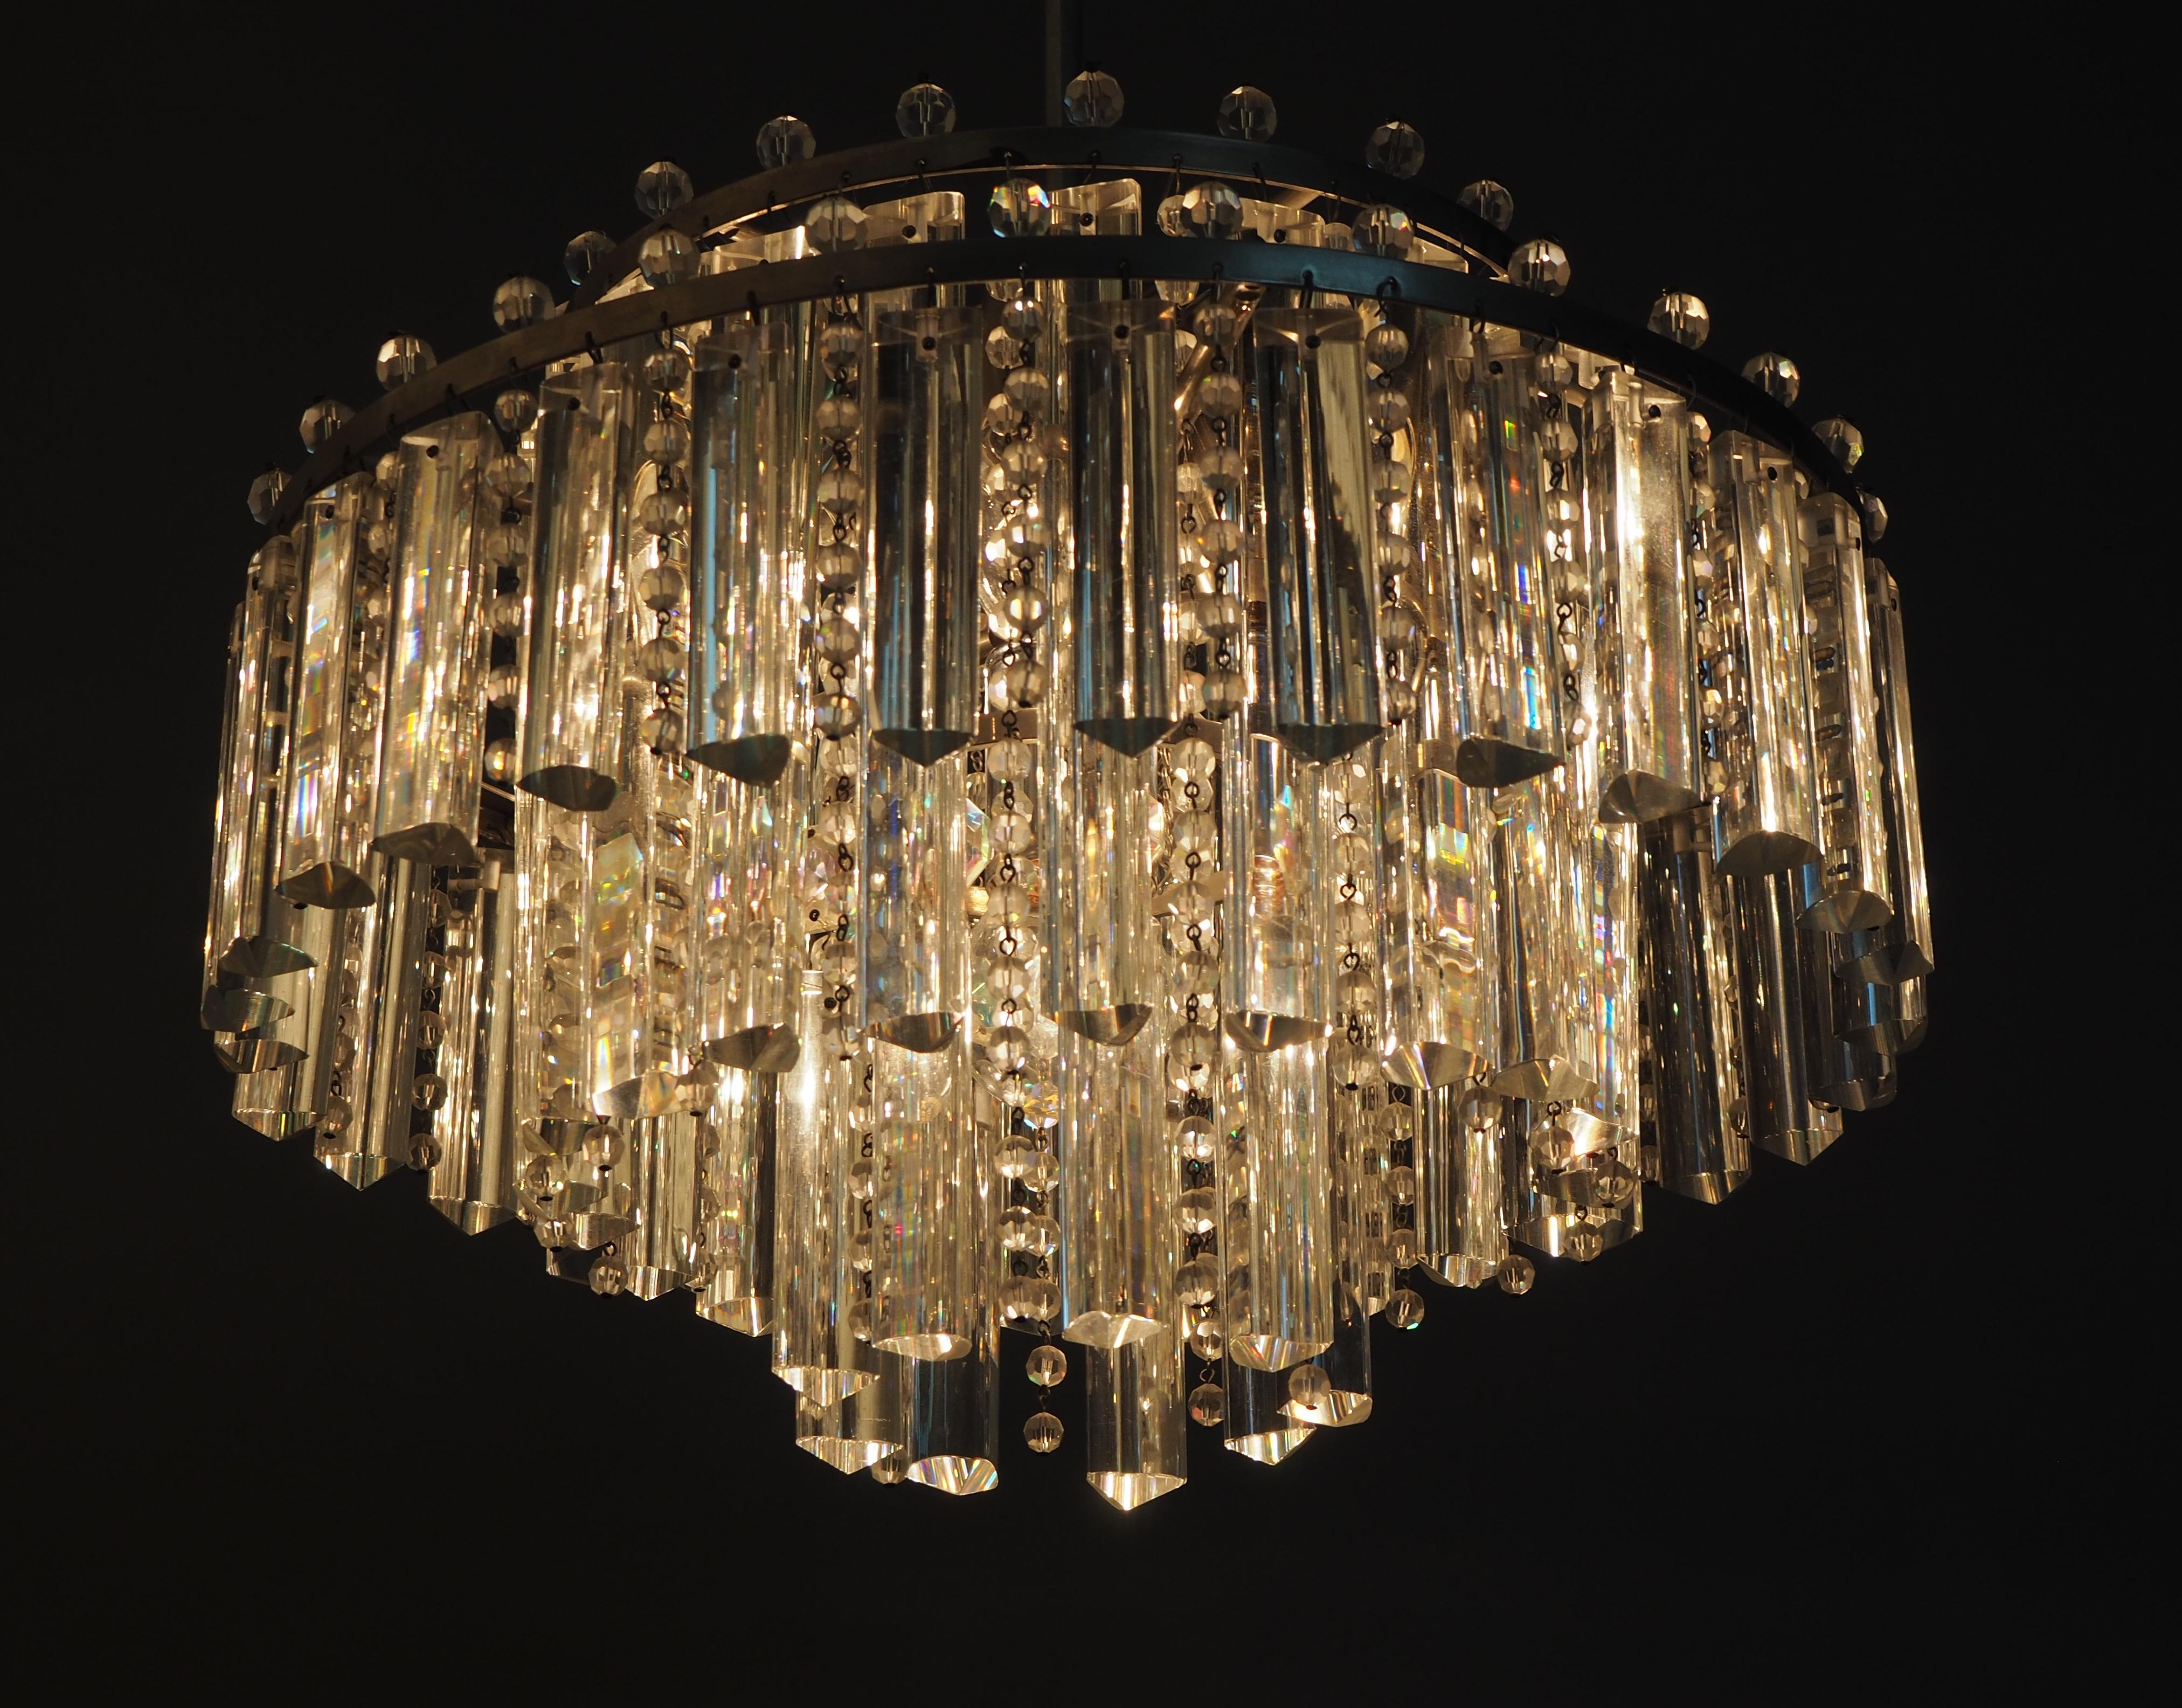 Rare model of three - tiered six-light glass chandelier by Palwa, circa 1960s.
The fixture is made of silver color patinated and heavy triangular glass rods and strass- prism.
Floodlight prisms give this chandelier a striking shape; only selected